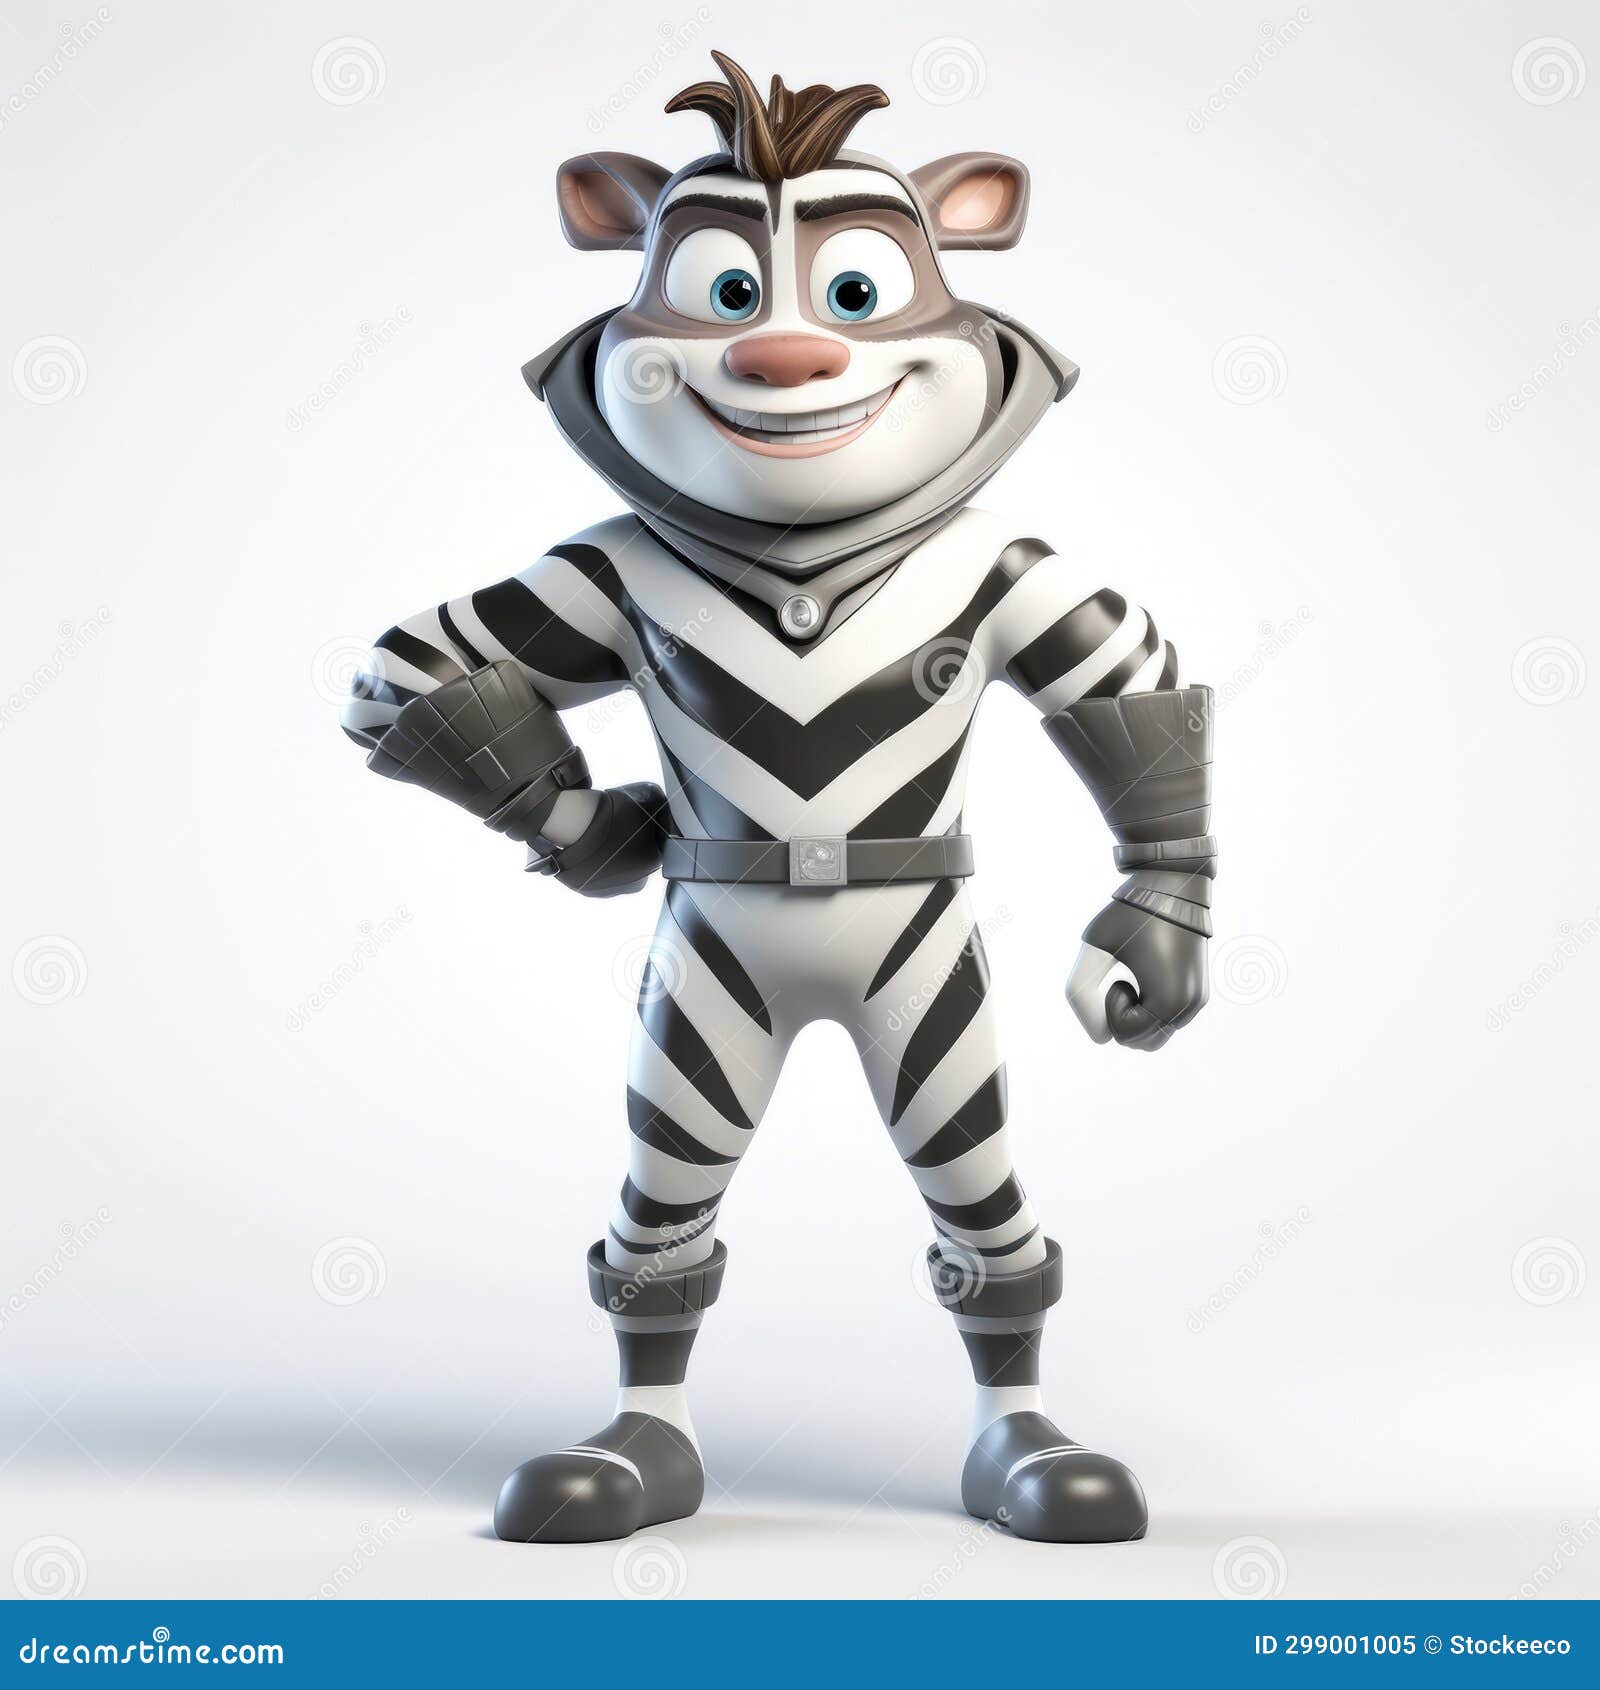 playful d rendered cartoon zebra interstellar comic book style detailed character design daddy realistic pose prop 299001005